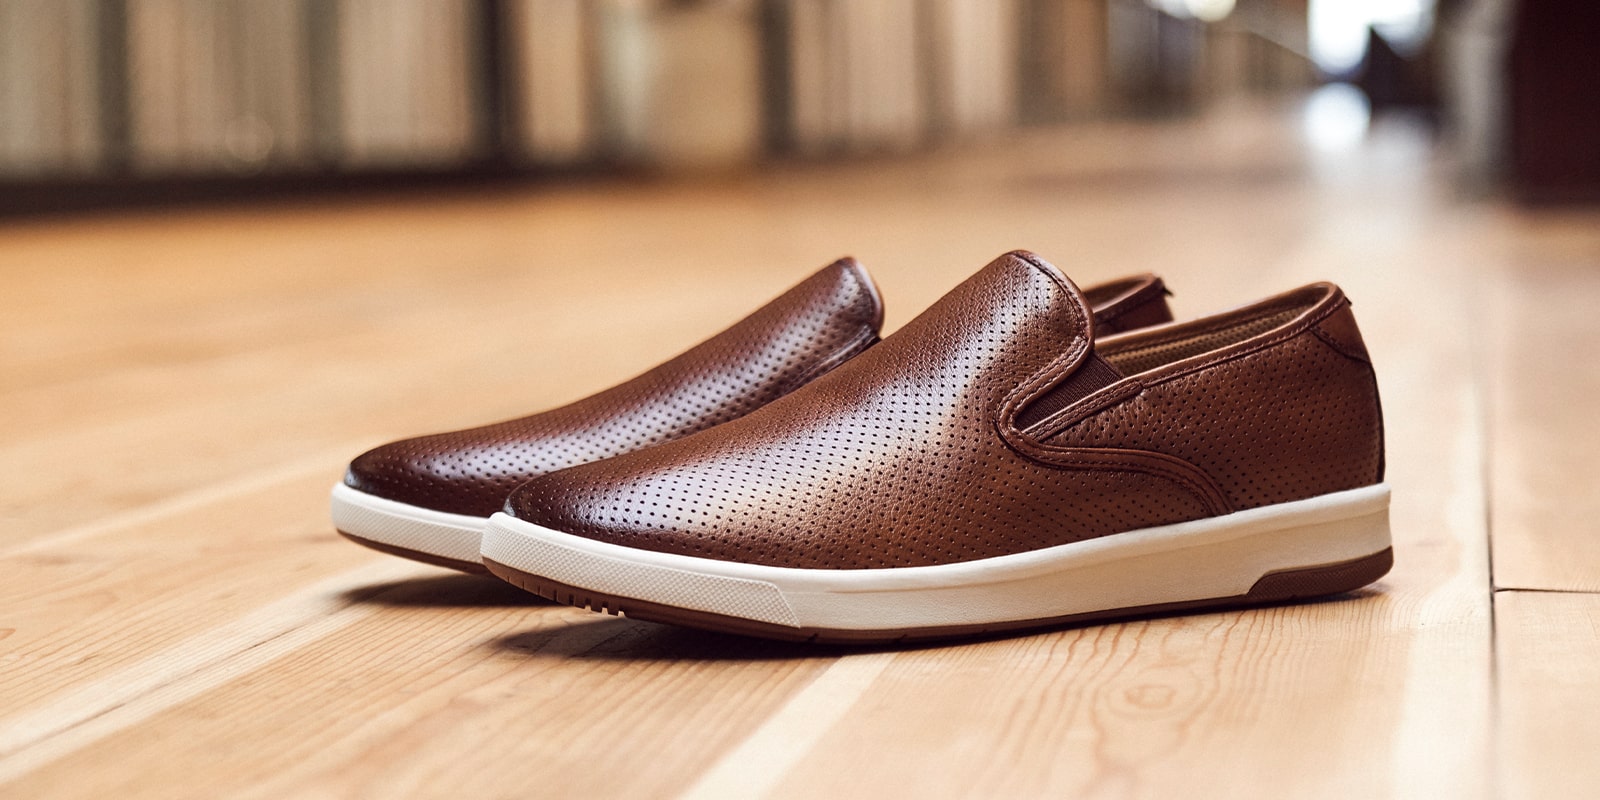 The featured image is a pair of Crossover Plain Toe Slip On Sneakers on parquet floor.